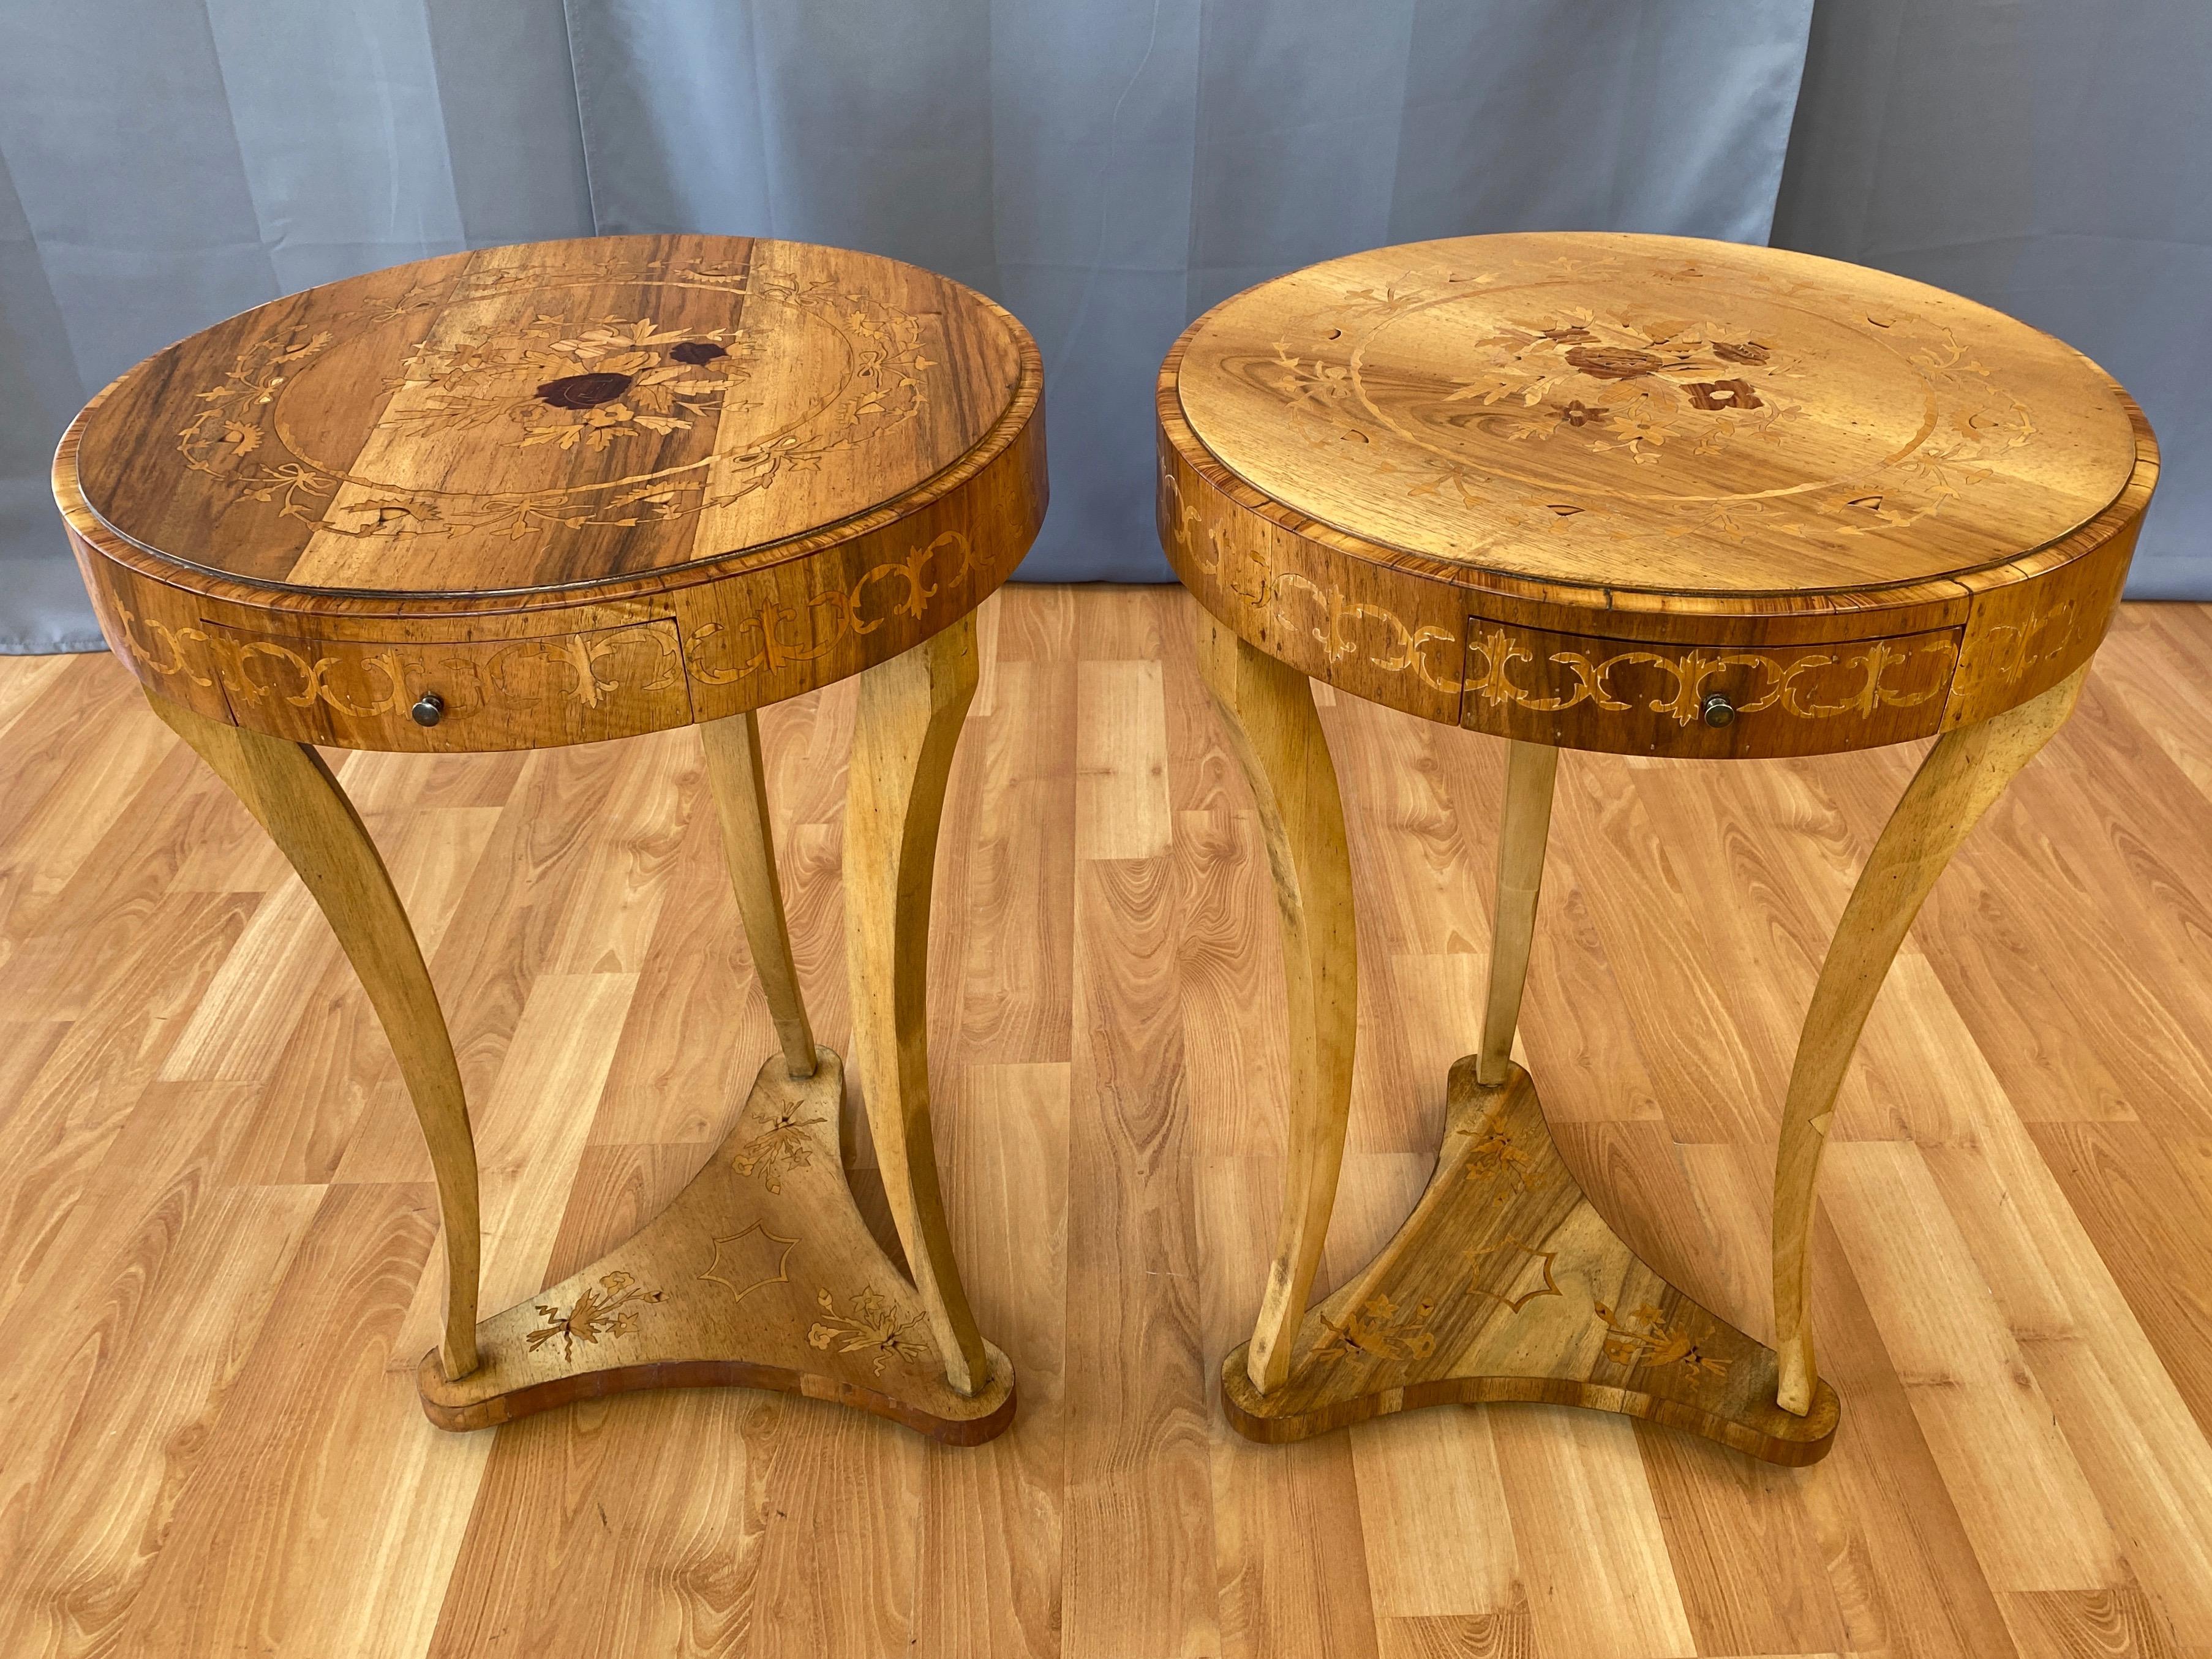 1940s side table